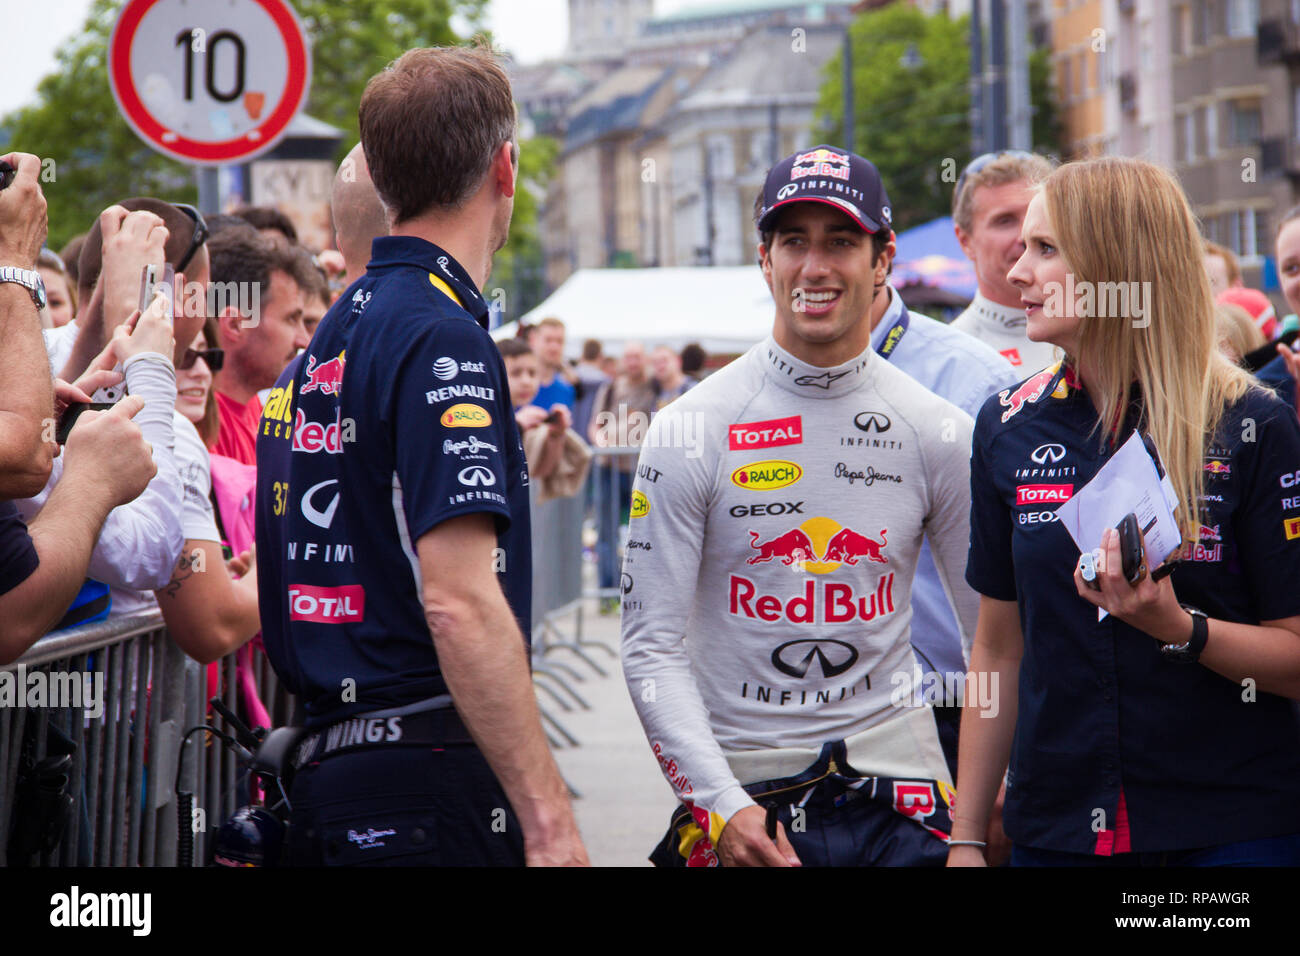 isolatie duizend middag F1 Daniel Ricciardo and David Coulthard /Archive Street, AD photos, Red  Bull, Infiniti, Pepe Jeans, Rauch, Geox, Renault, Total/ 2014 Budapest,  Hungary Stock Photo - Alamy